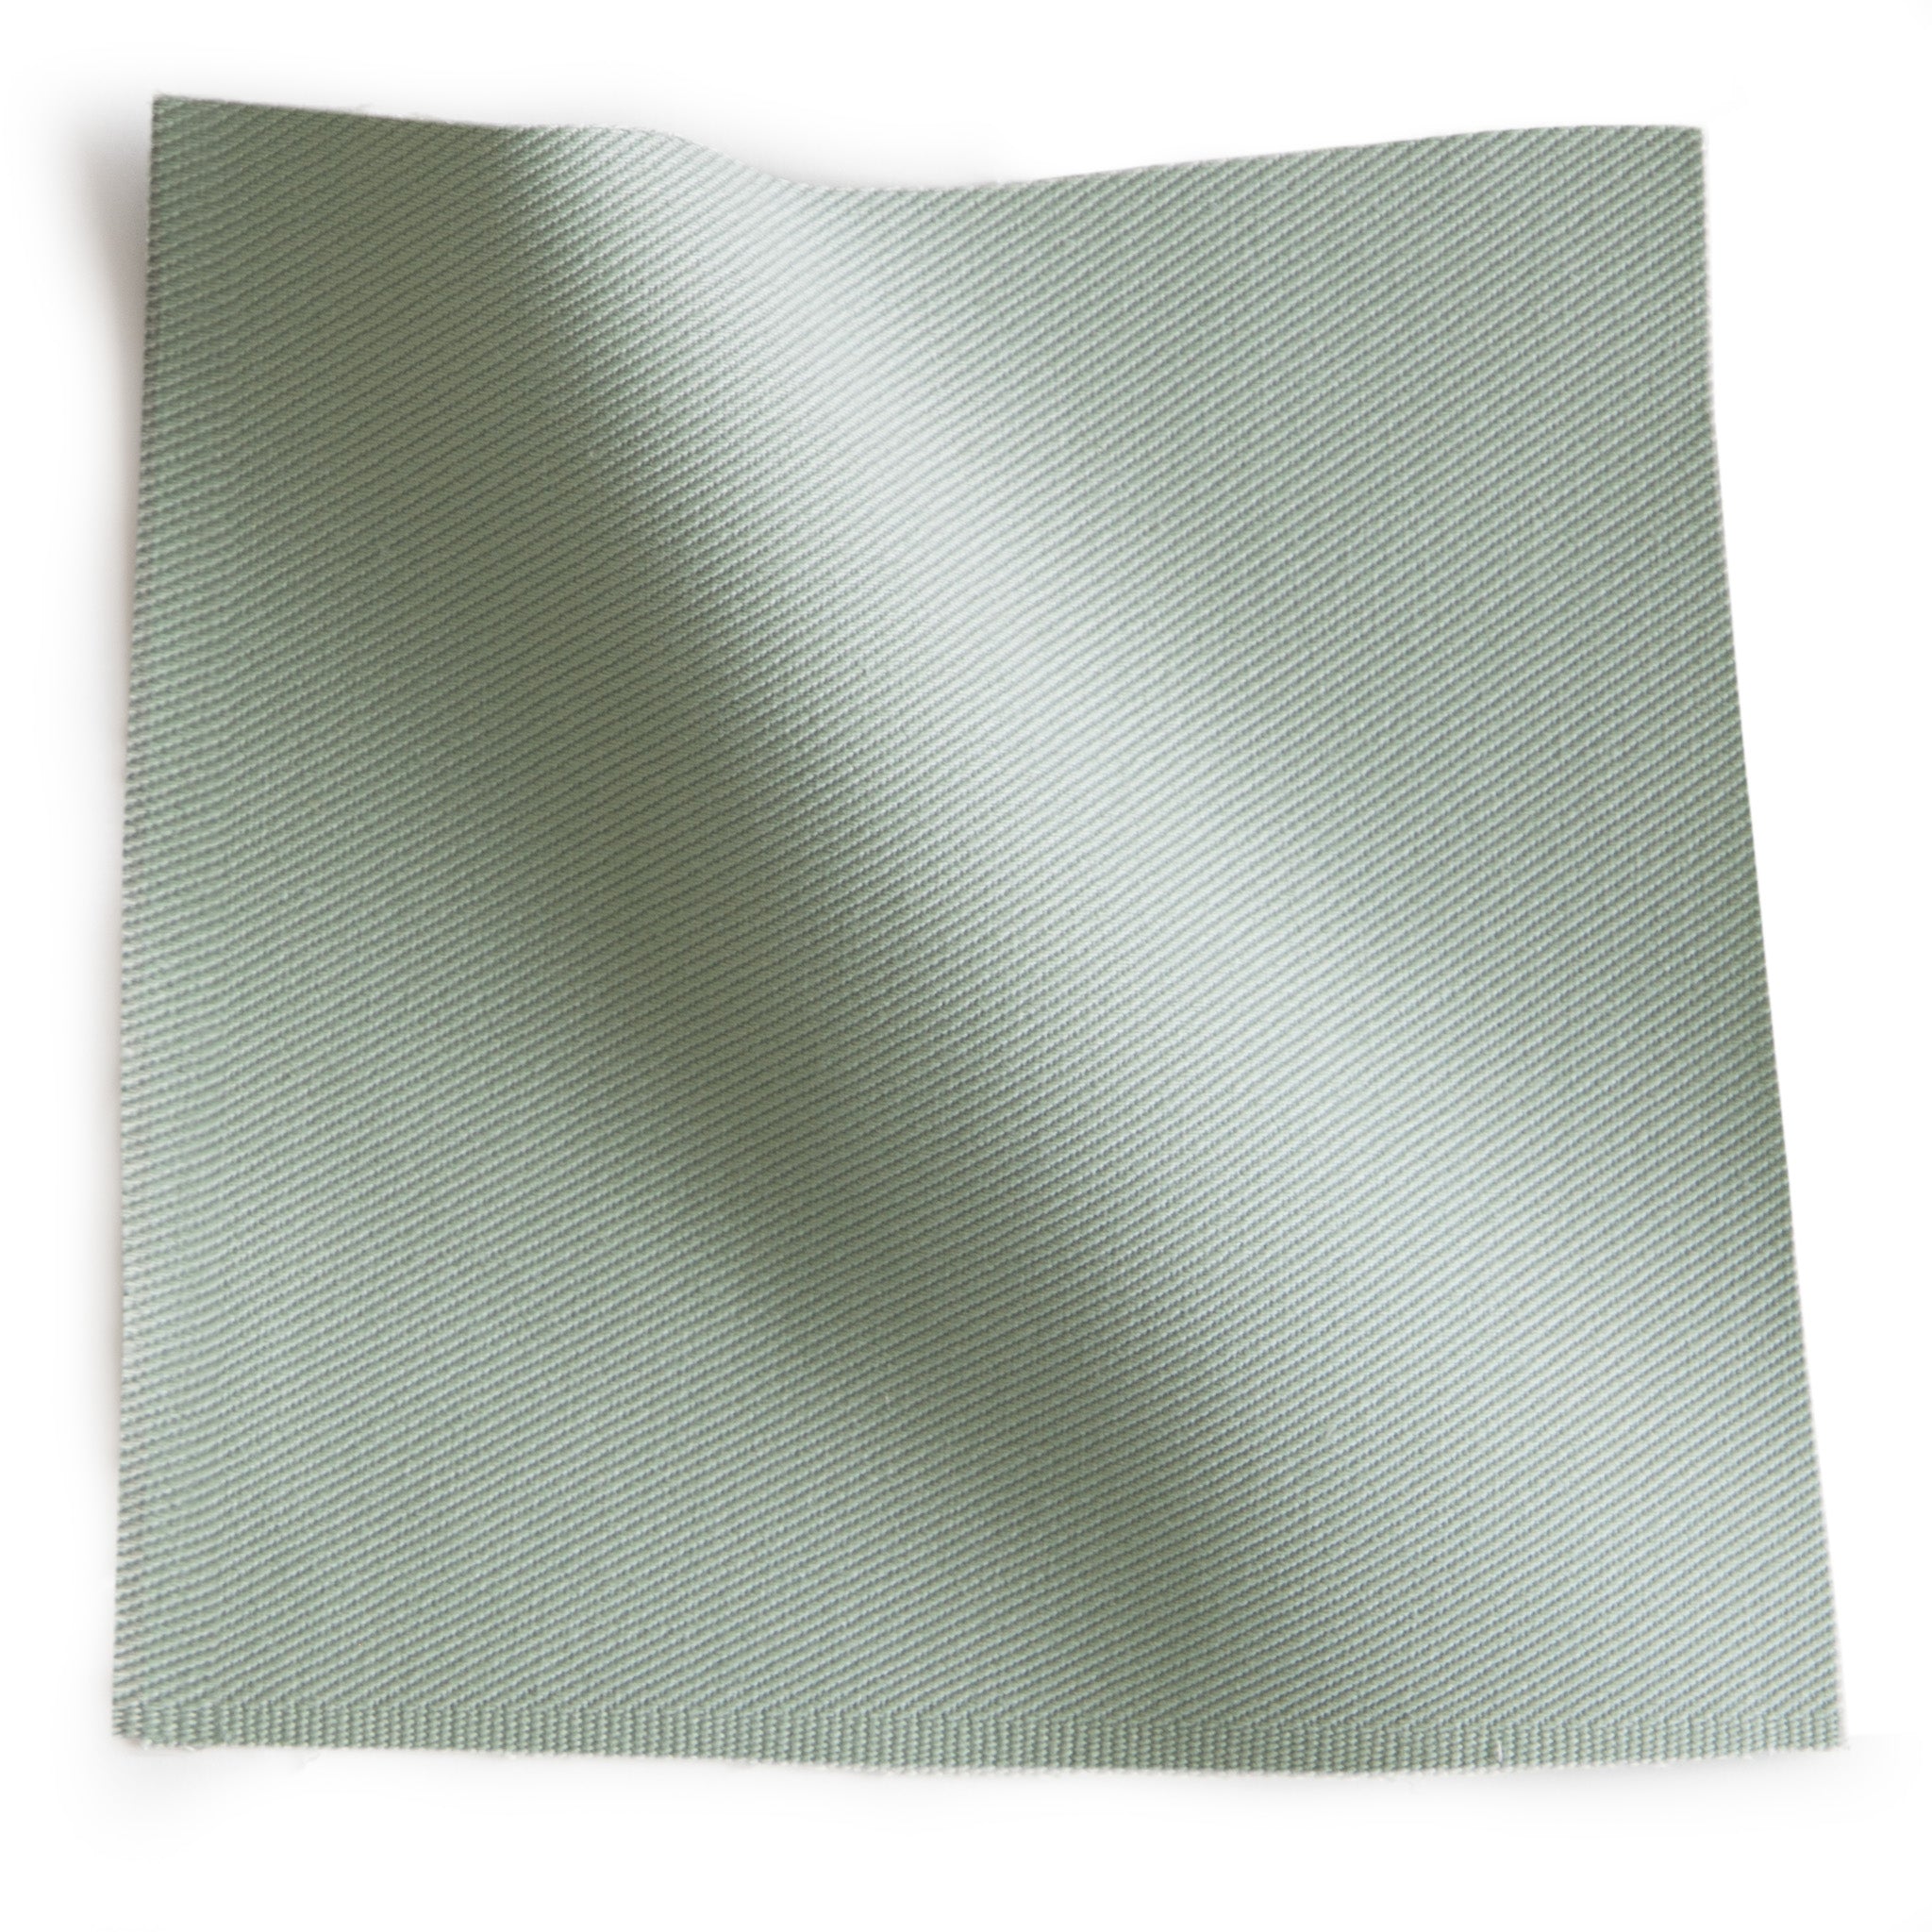 Sage green printed cotton fabric swatch